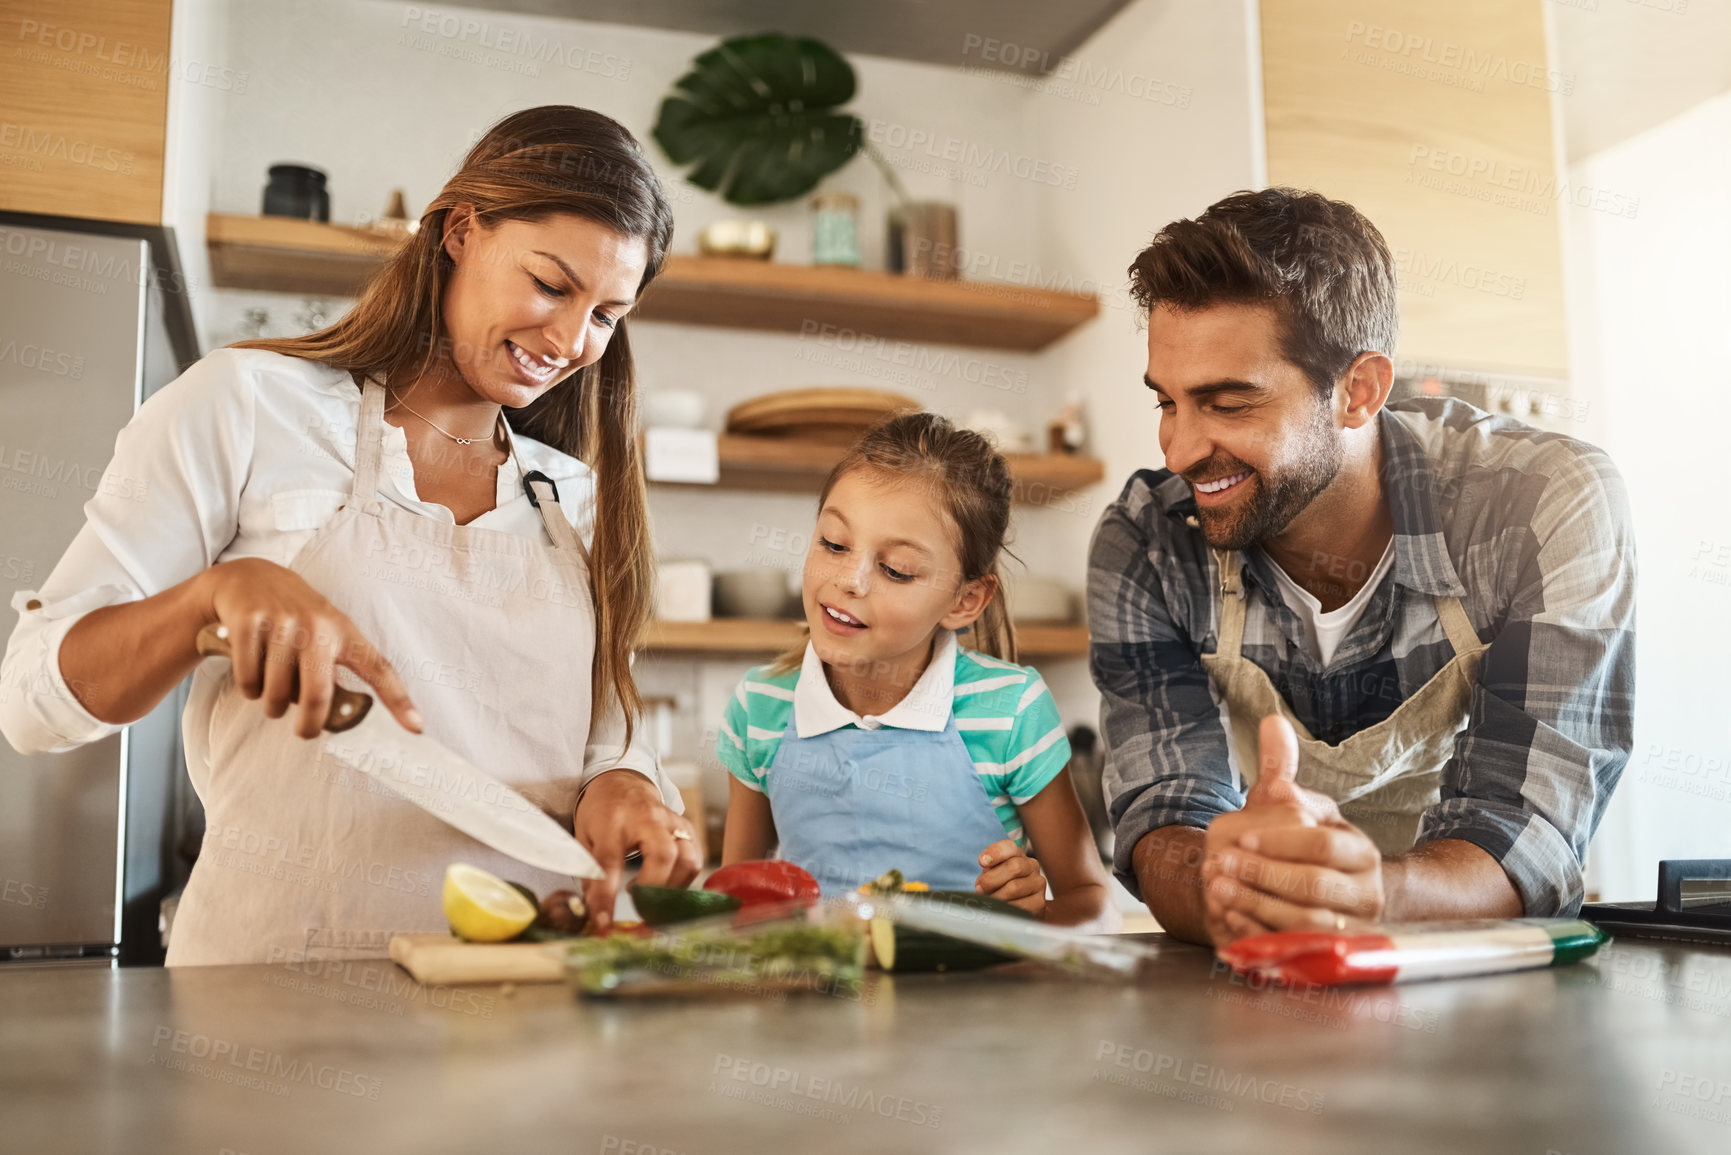 Buy stock photo Shot of a happy young family cooking together in their kitchen at home